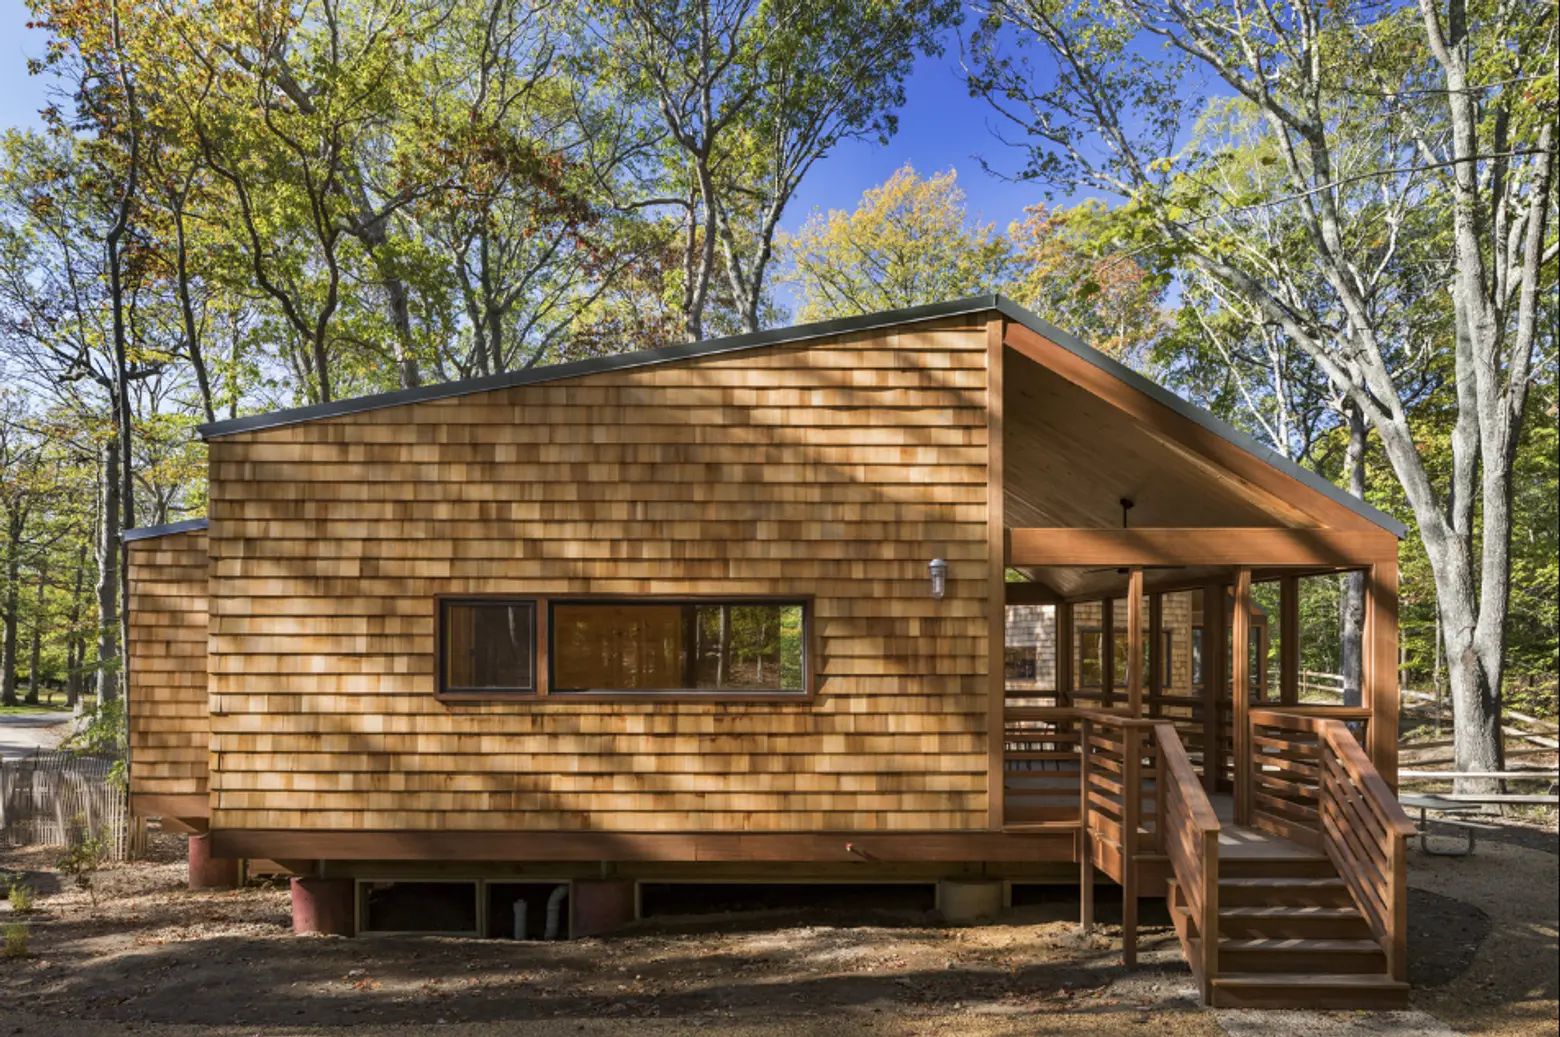 New Long Island camping cabins bring modern, affordable design to state parks